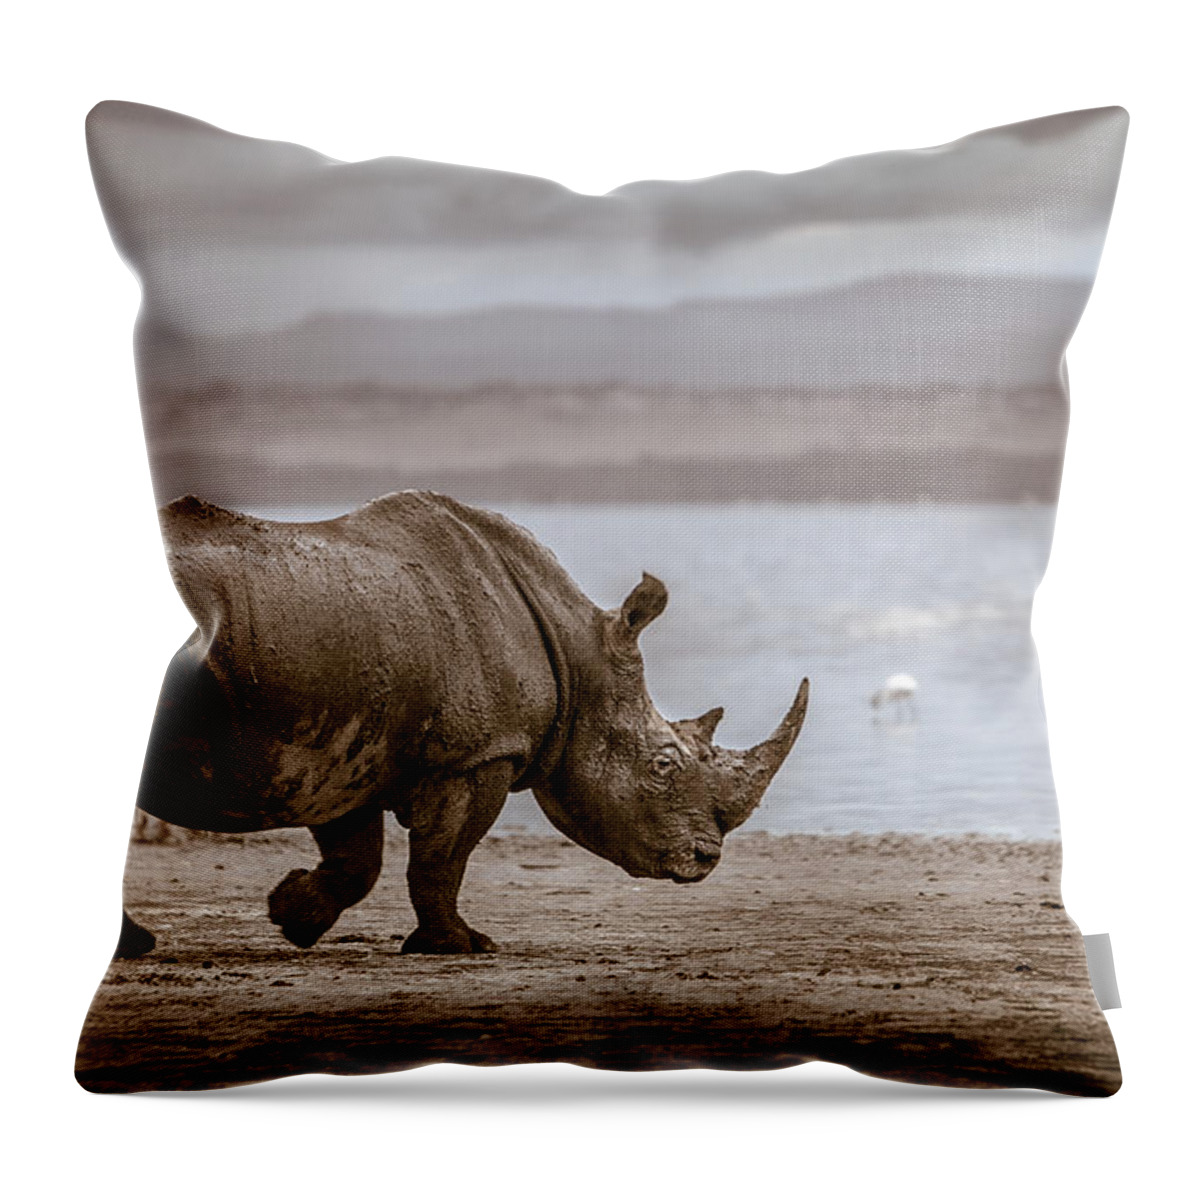 #faatoppicks Throw Pillow featuring the photograph Vintage Rhino On The Shore by Mike Gaudaur